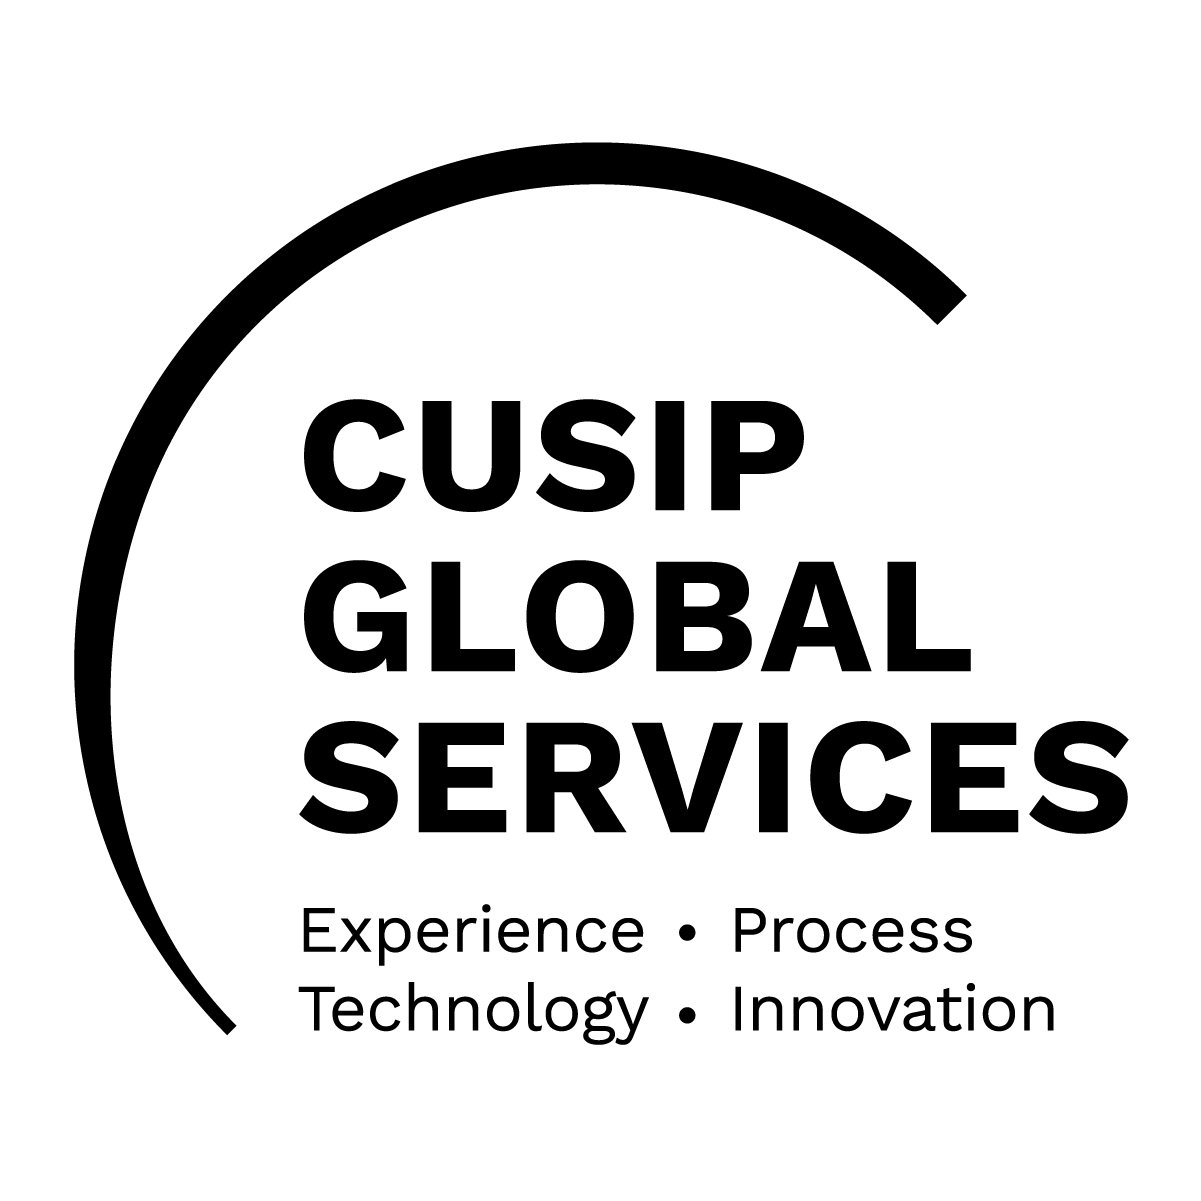  CUSIP GLOBAL SERVICES EXPERIENCE PROCESS TECHNOLOGY INNOVATION